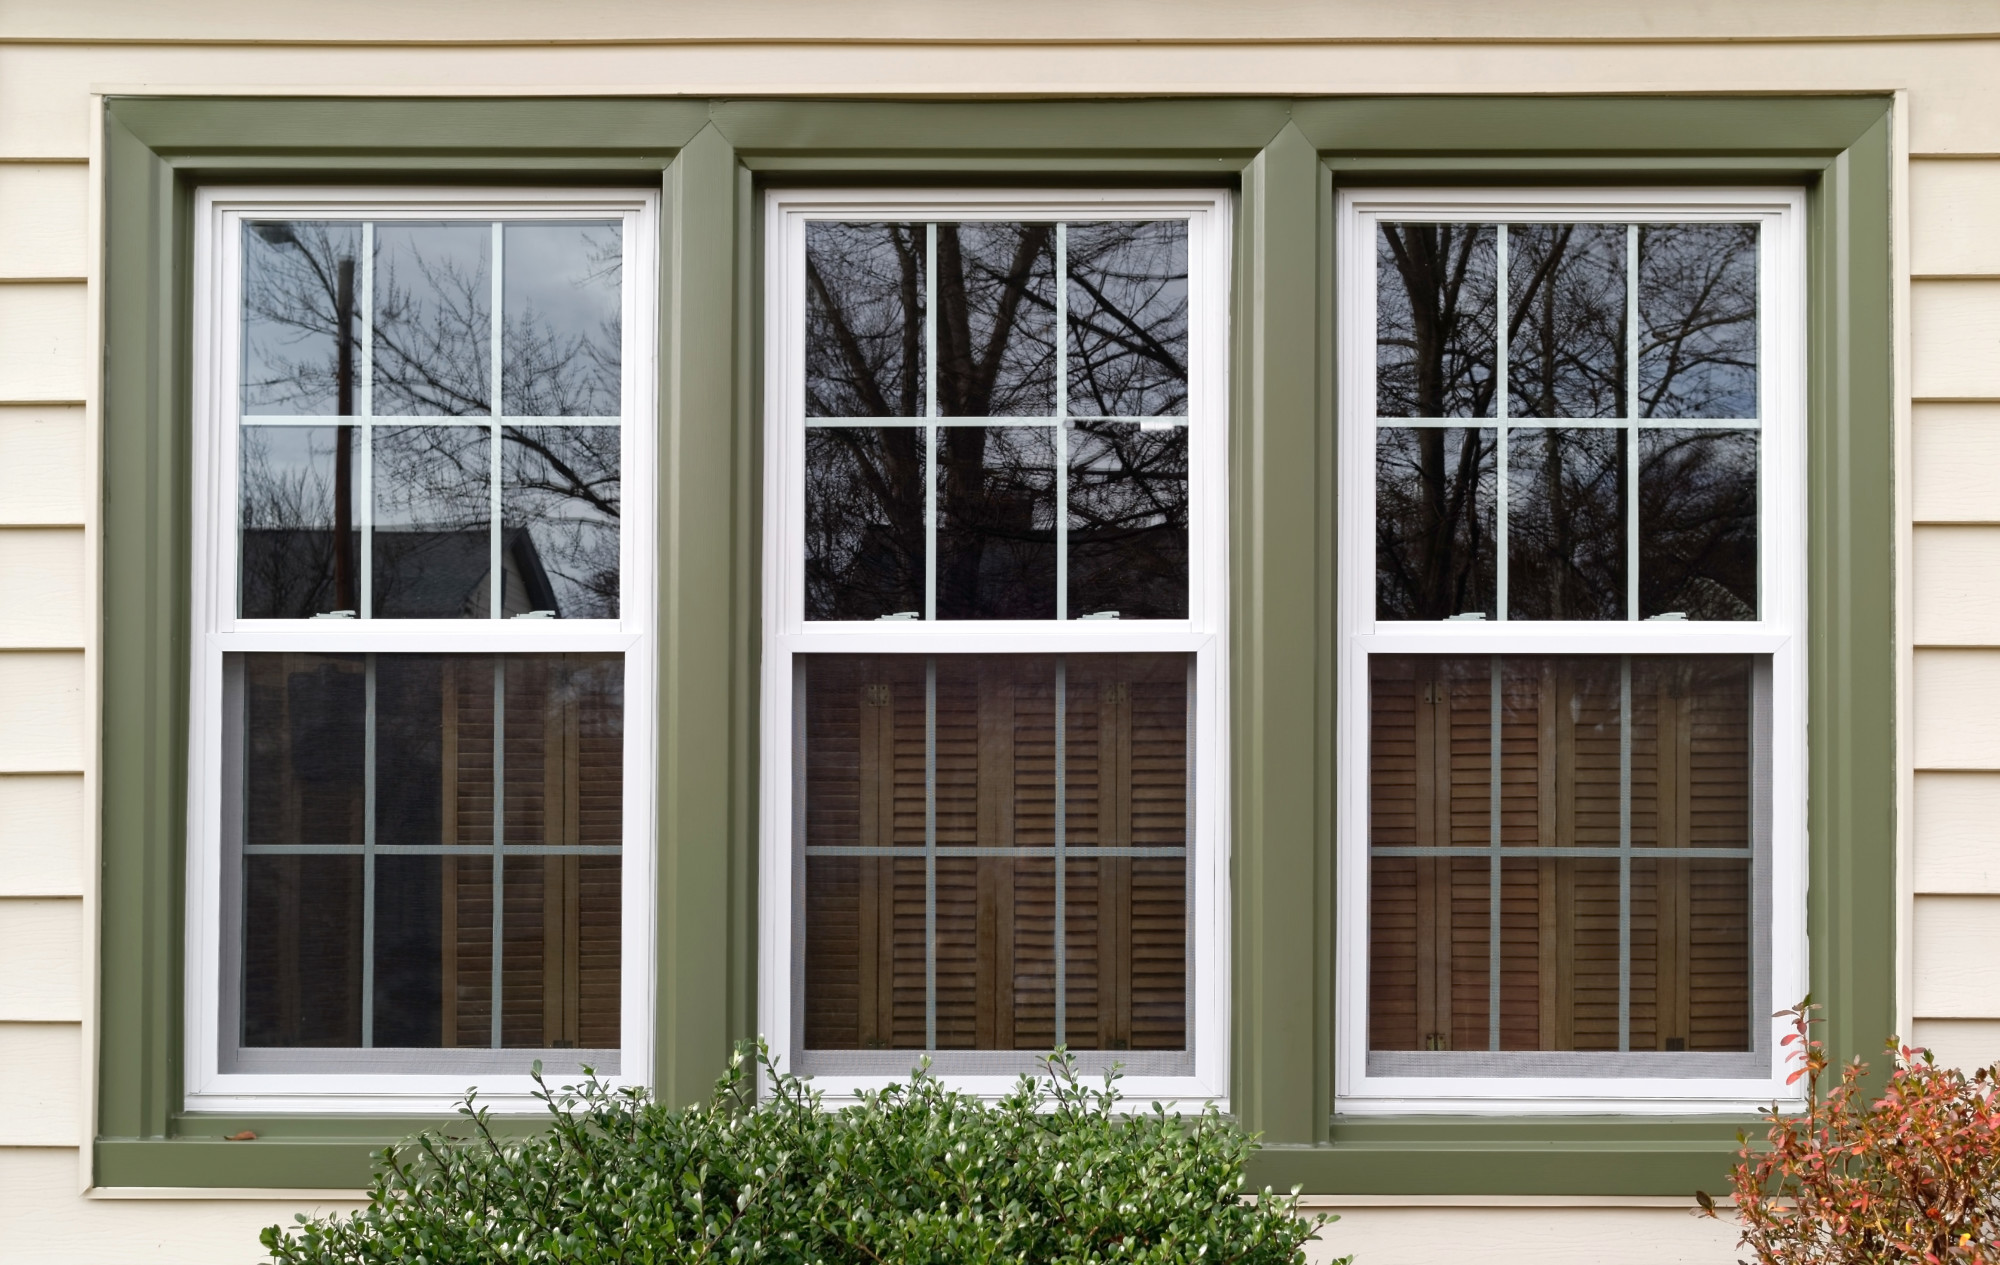 Would you like to know how to remove window tint from house windows? Read on to learn what you need to know on the subject.